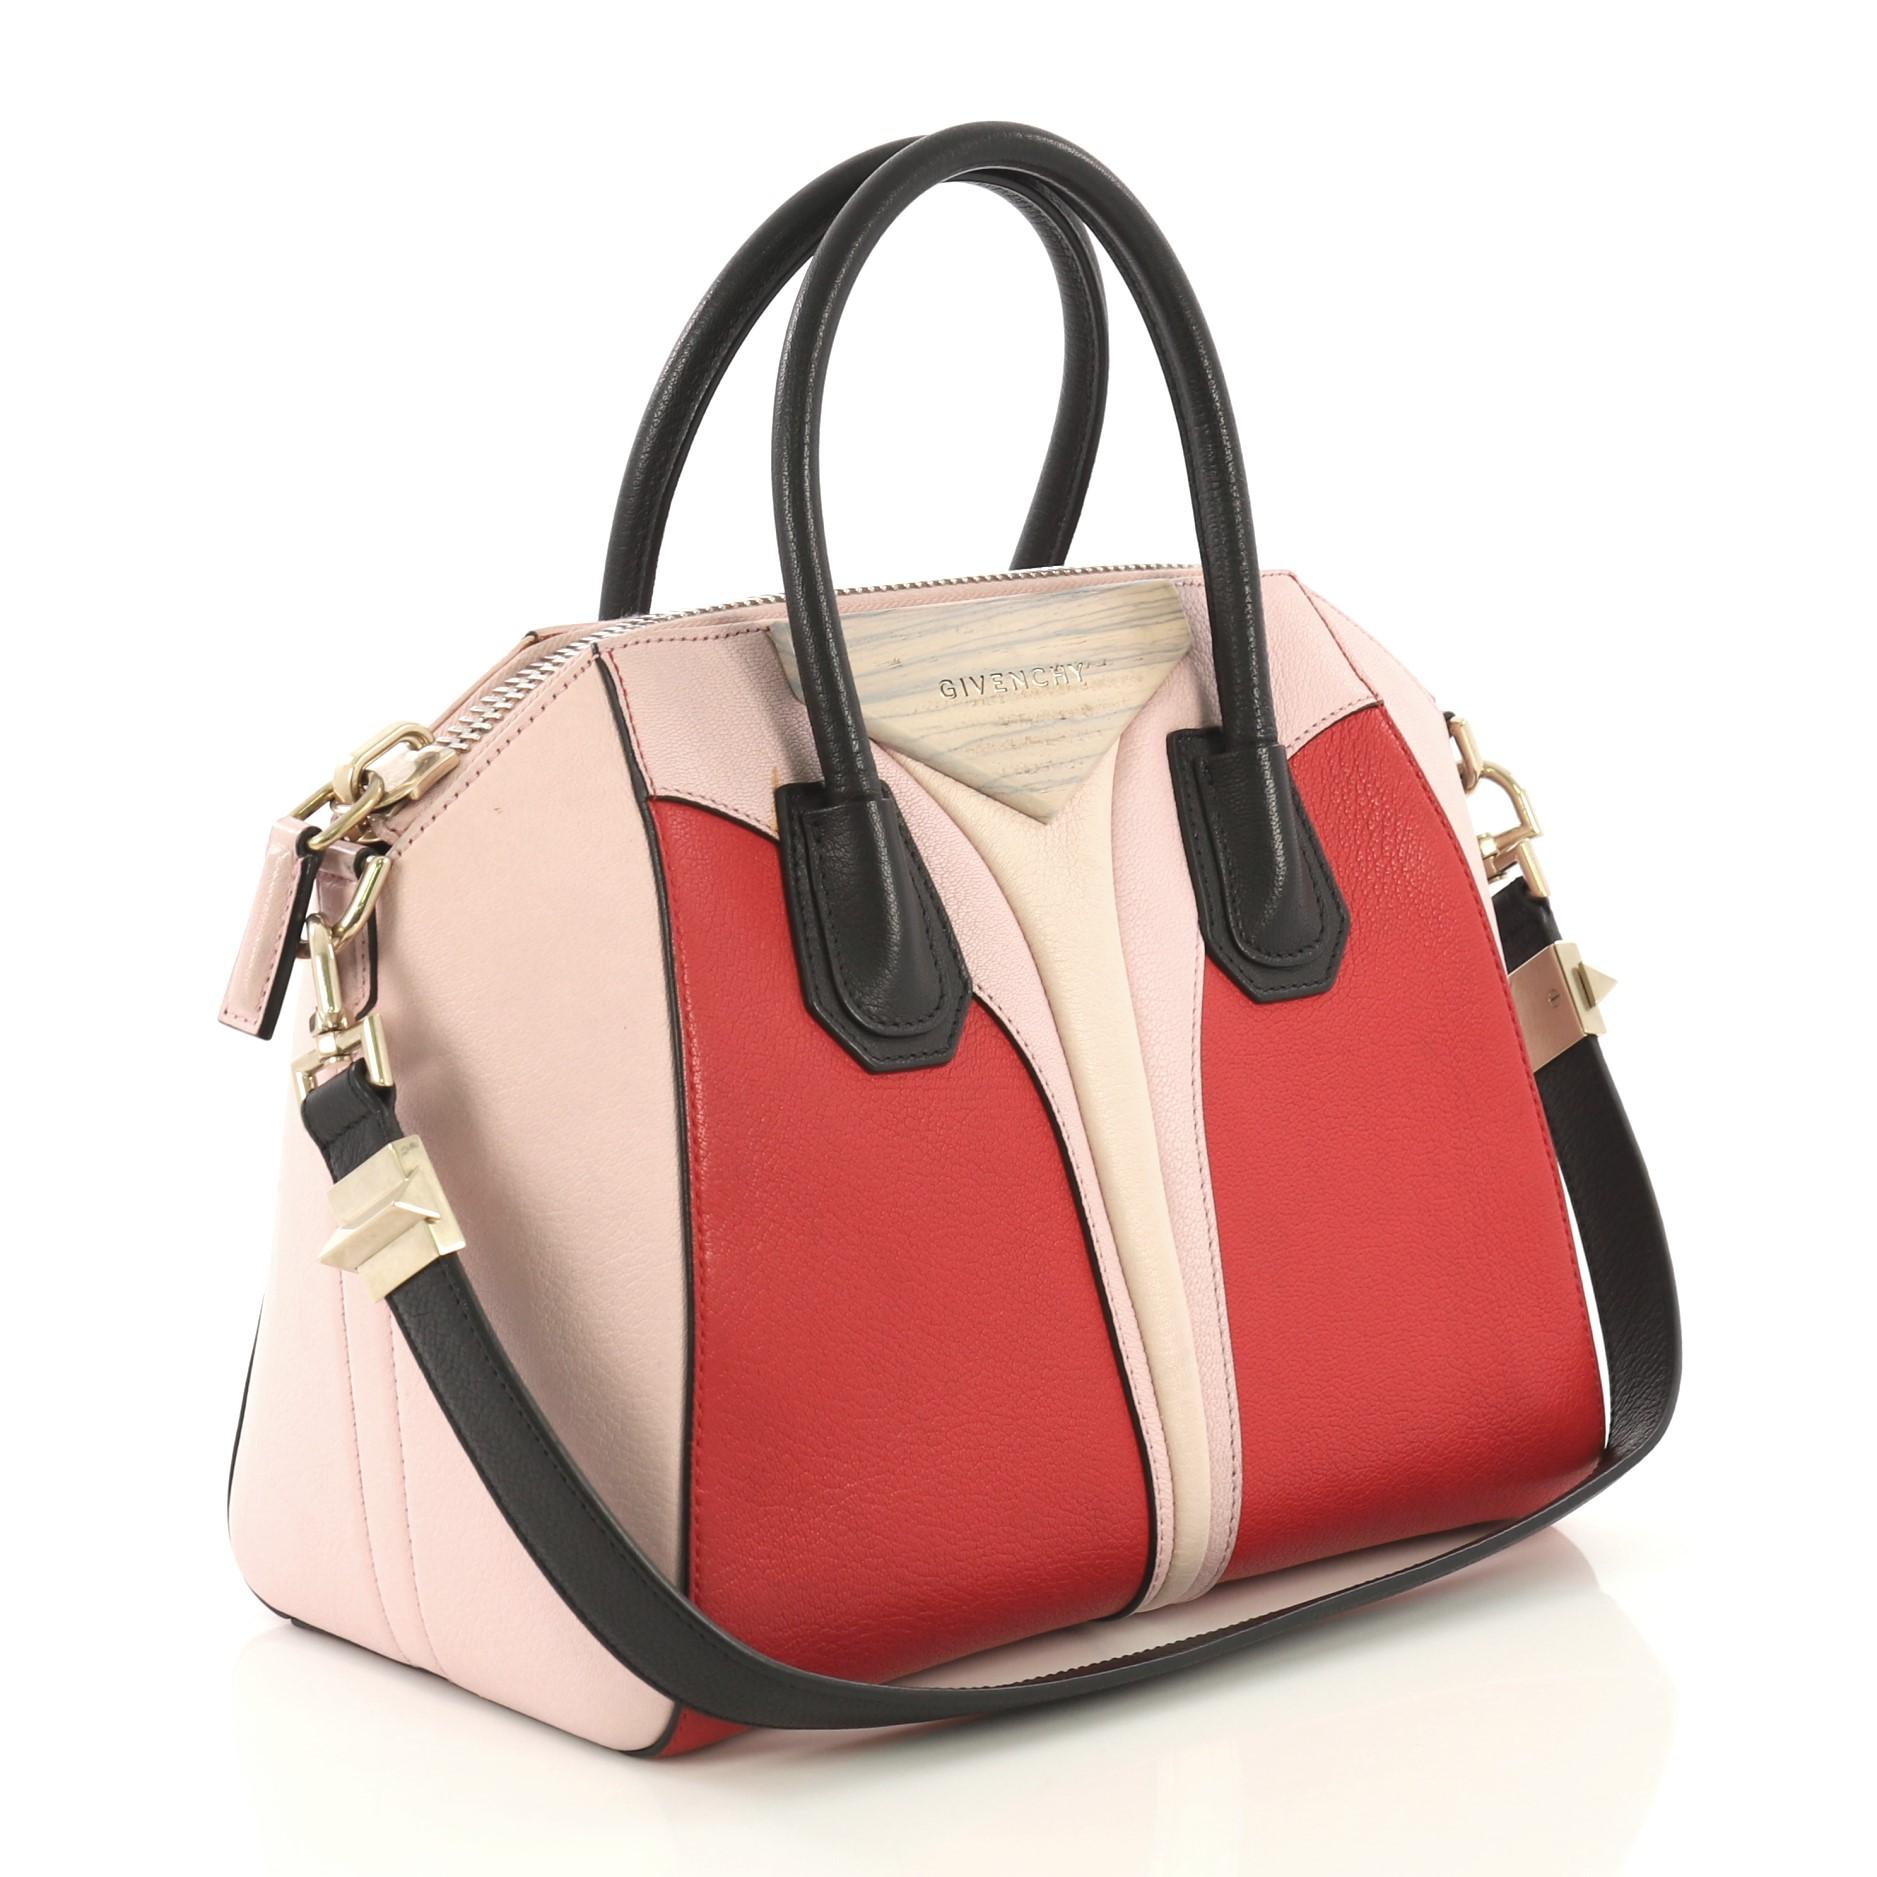 This Givenchy Antigona Architect Bag Colorblock Leather Small, crafted in red and pink leather, features dual rolled leather handles, envelope fold with raised logo, and gold and silver-tone hardware. Its zip closure opens to a black fabric interior